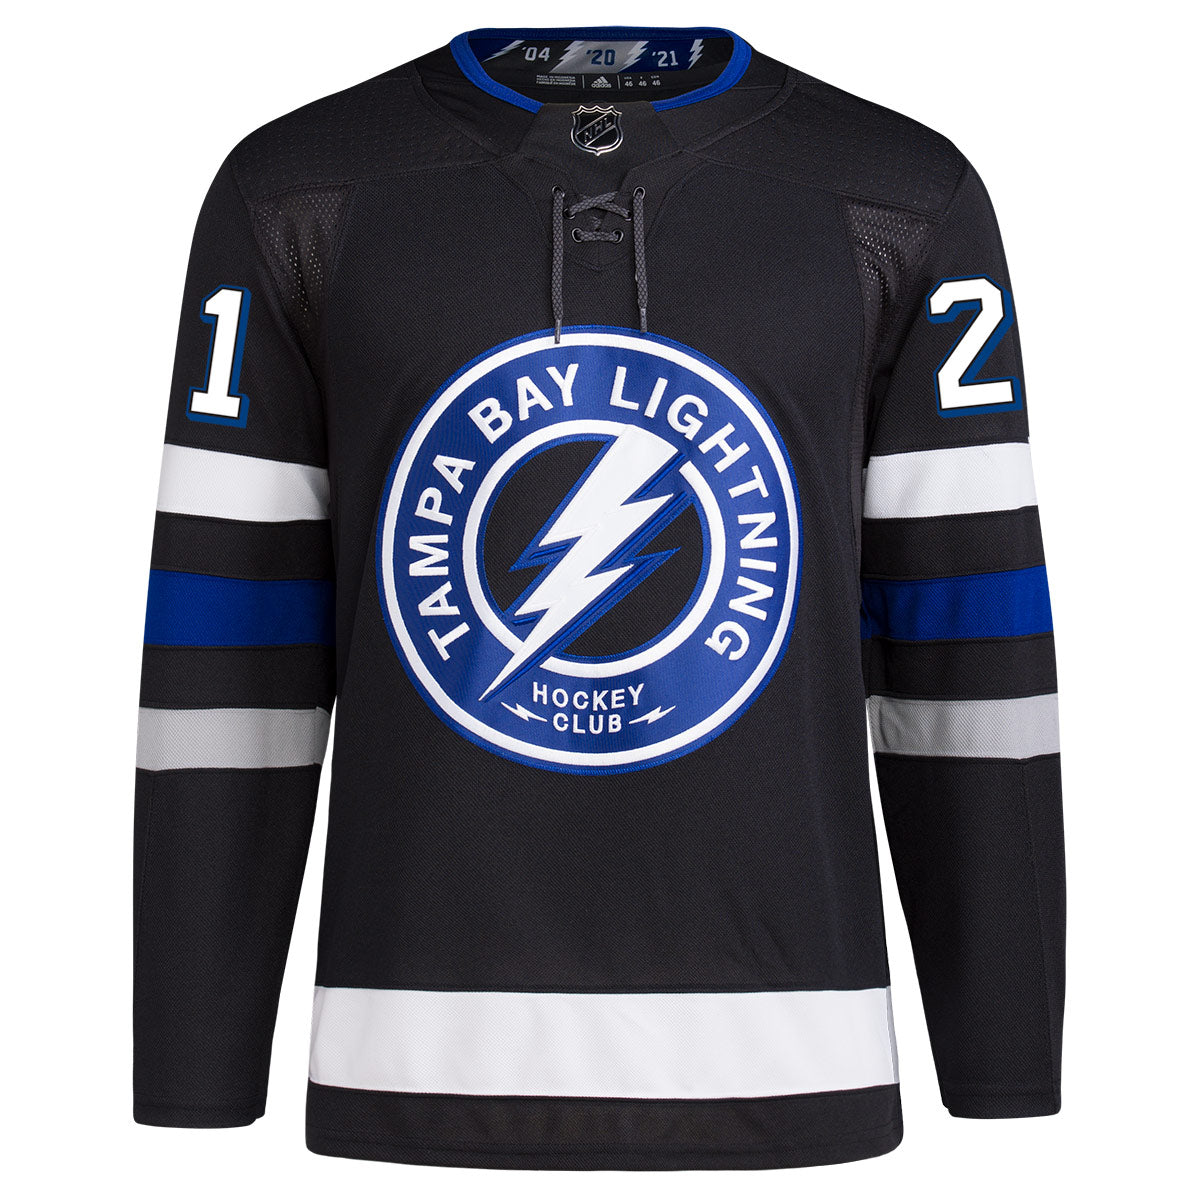 #21 POINT Primegreen ADIZERO Lightning Third Jersey with Authentic Lettering